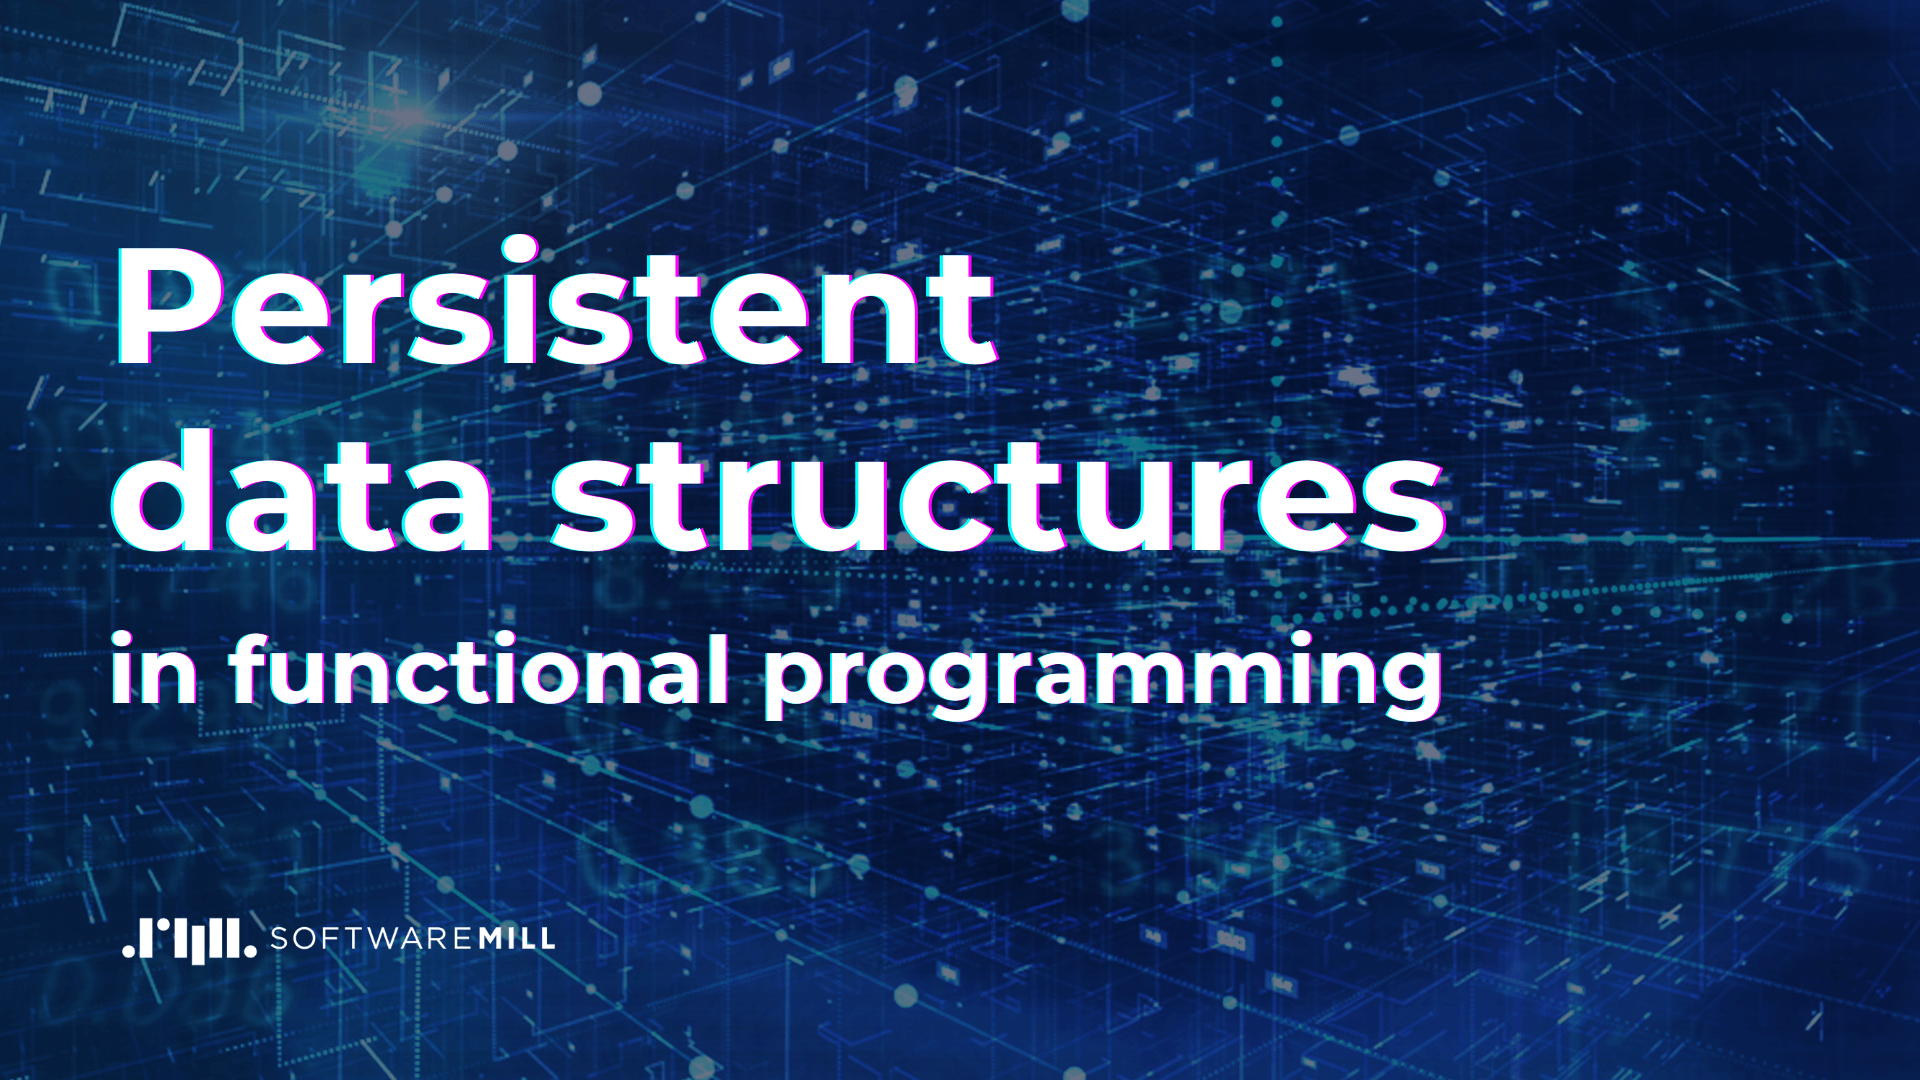 Persistent data structures in functional programming webp image